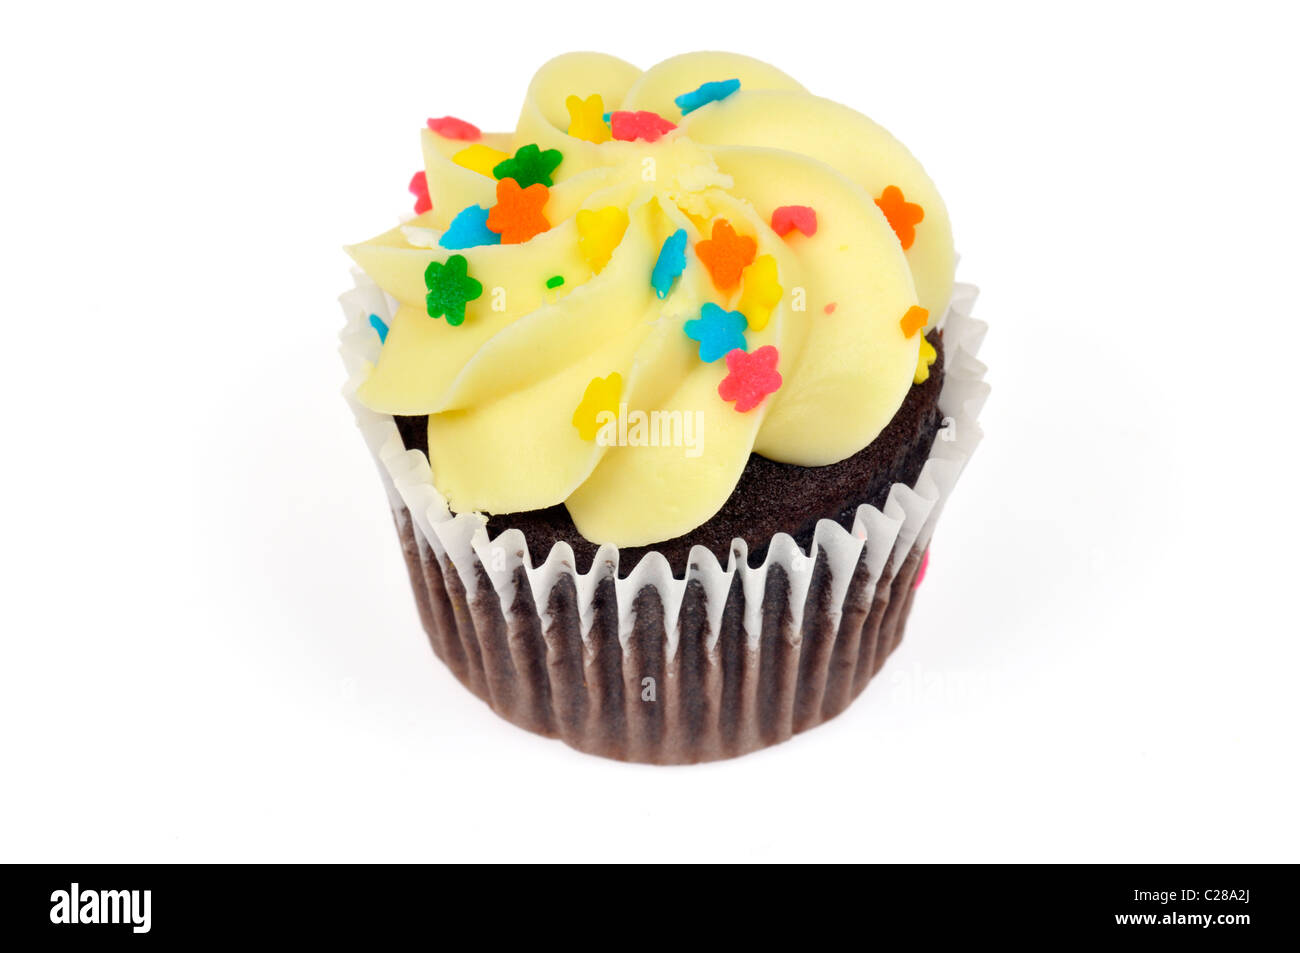 Chocolate cupcake decorated with yellow lemon icing and colorful sprinkles on white background cut out Stock Photo